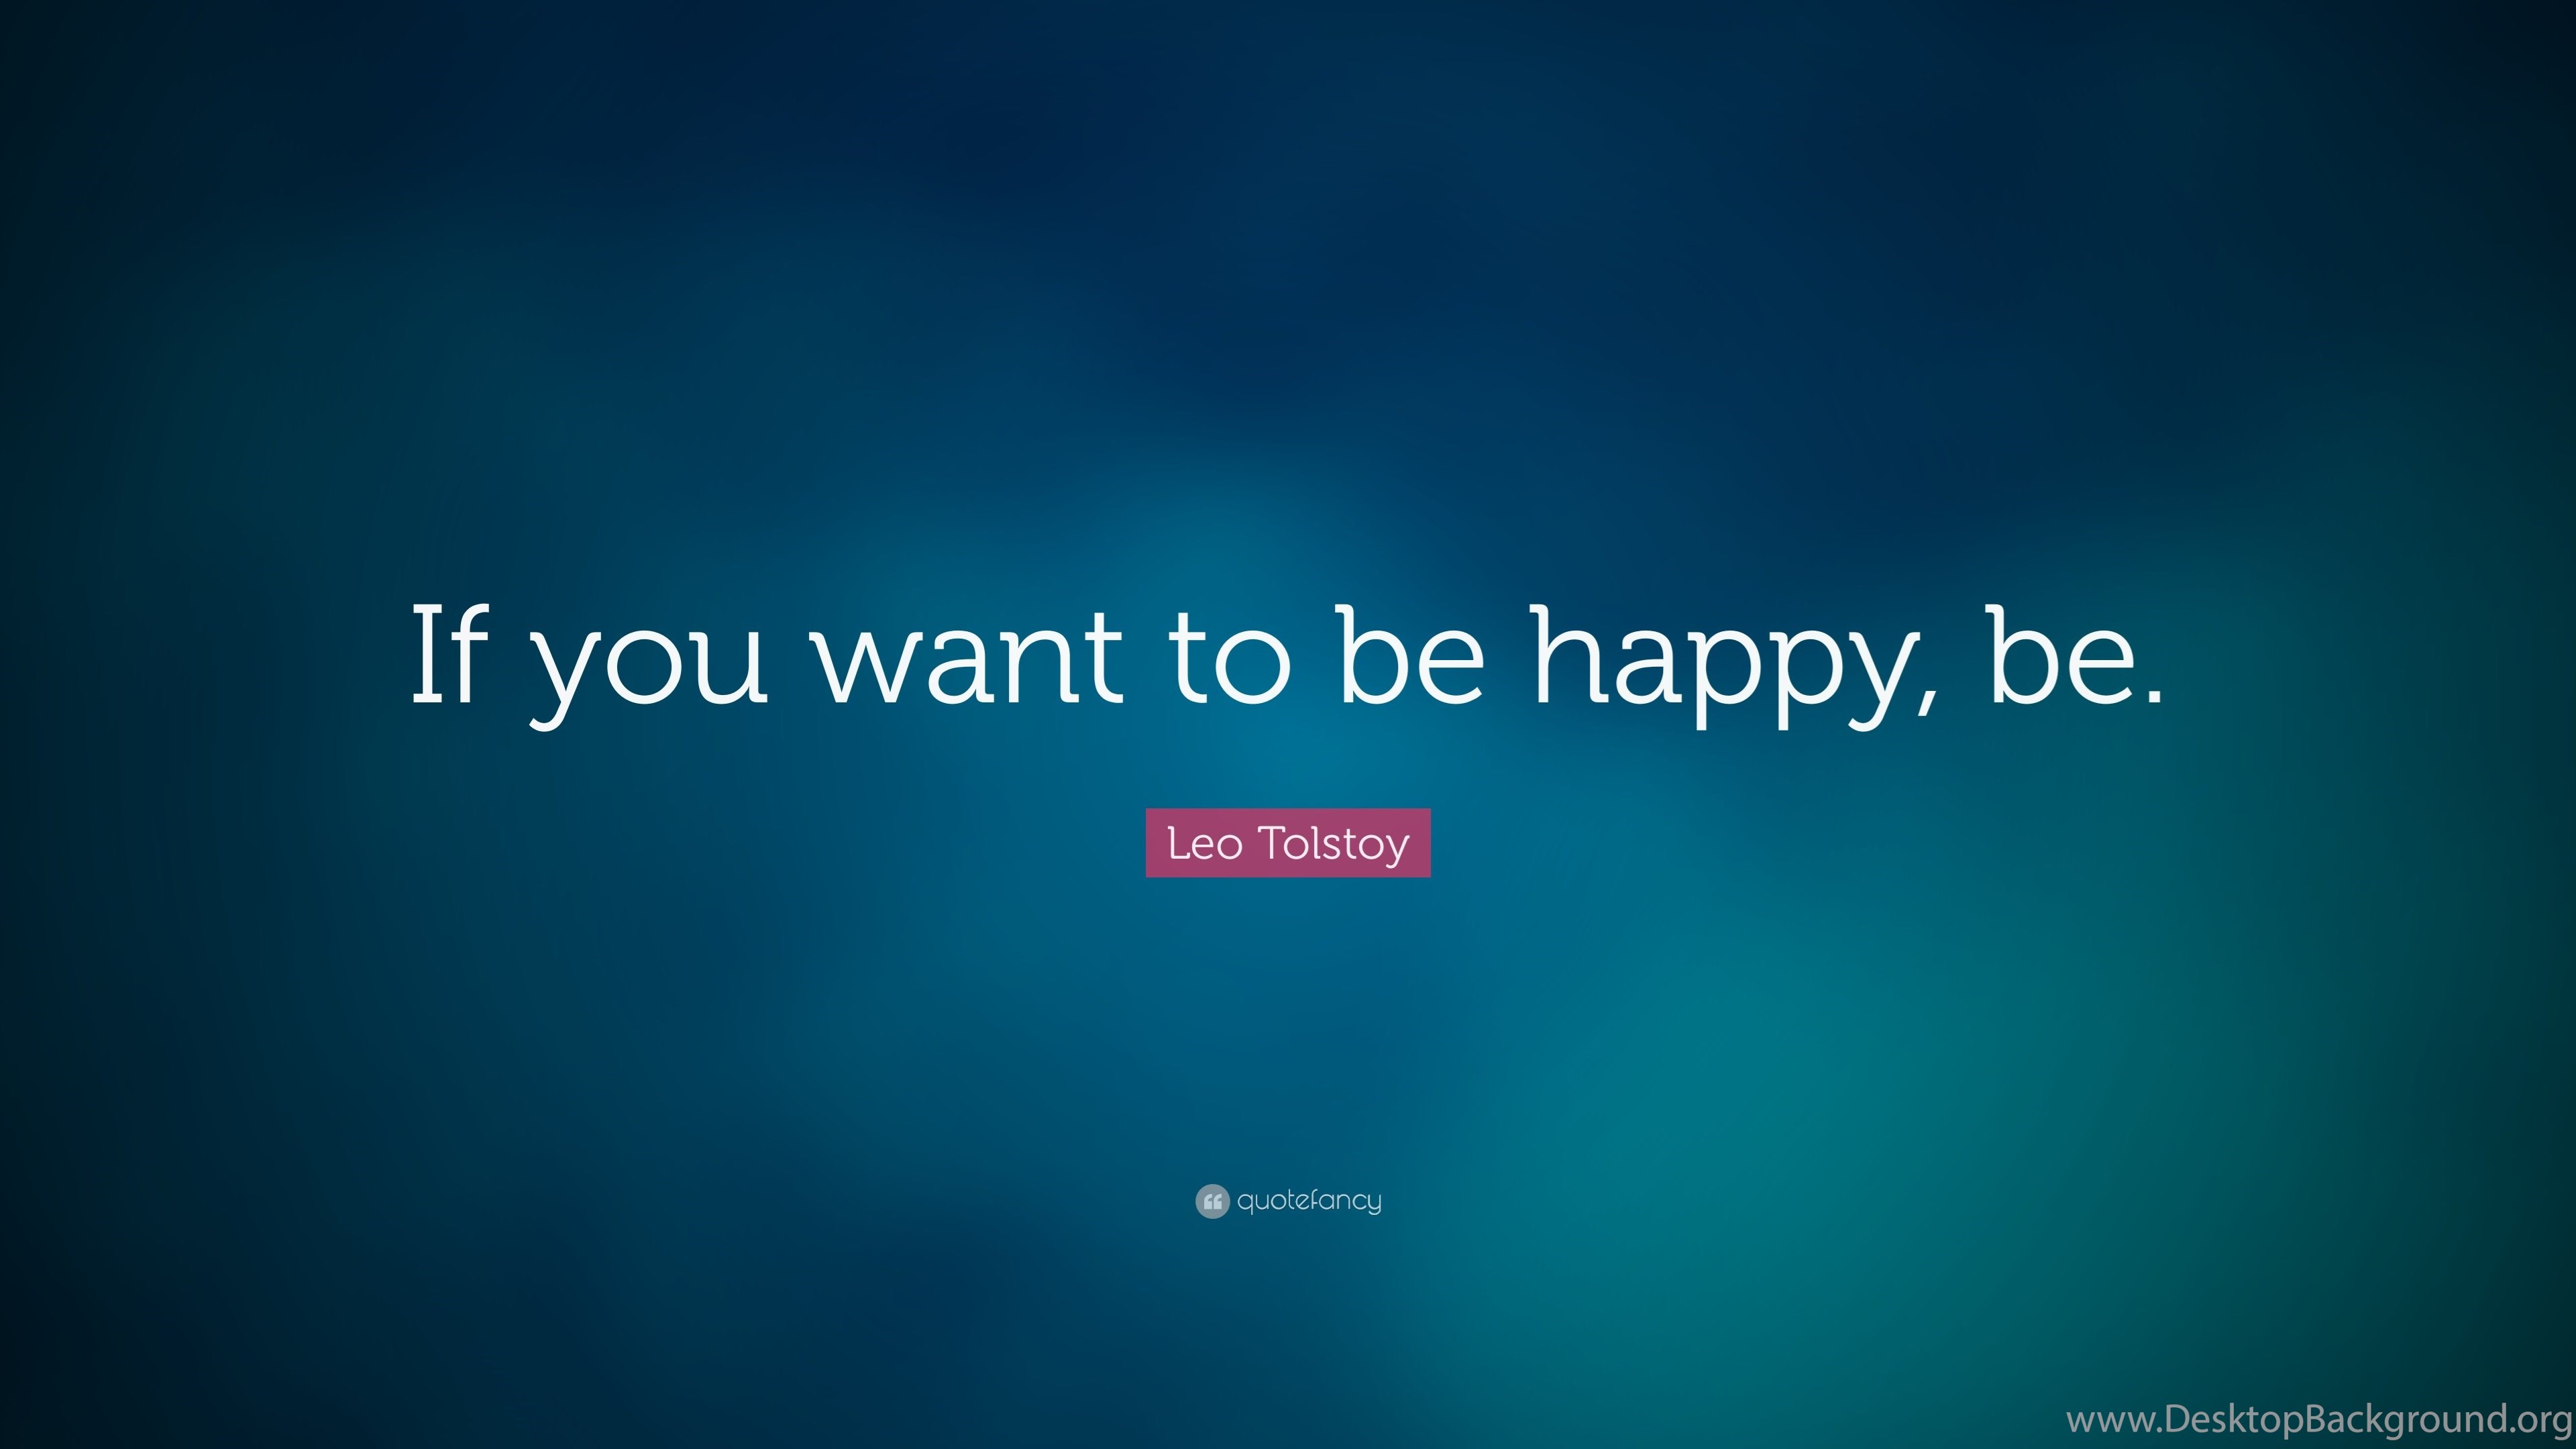 Leo Tolstoy Quote If You Want To Be Happy Be 12 Wallpapers Desktop Background